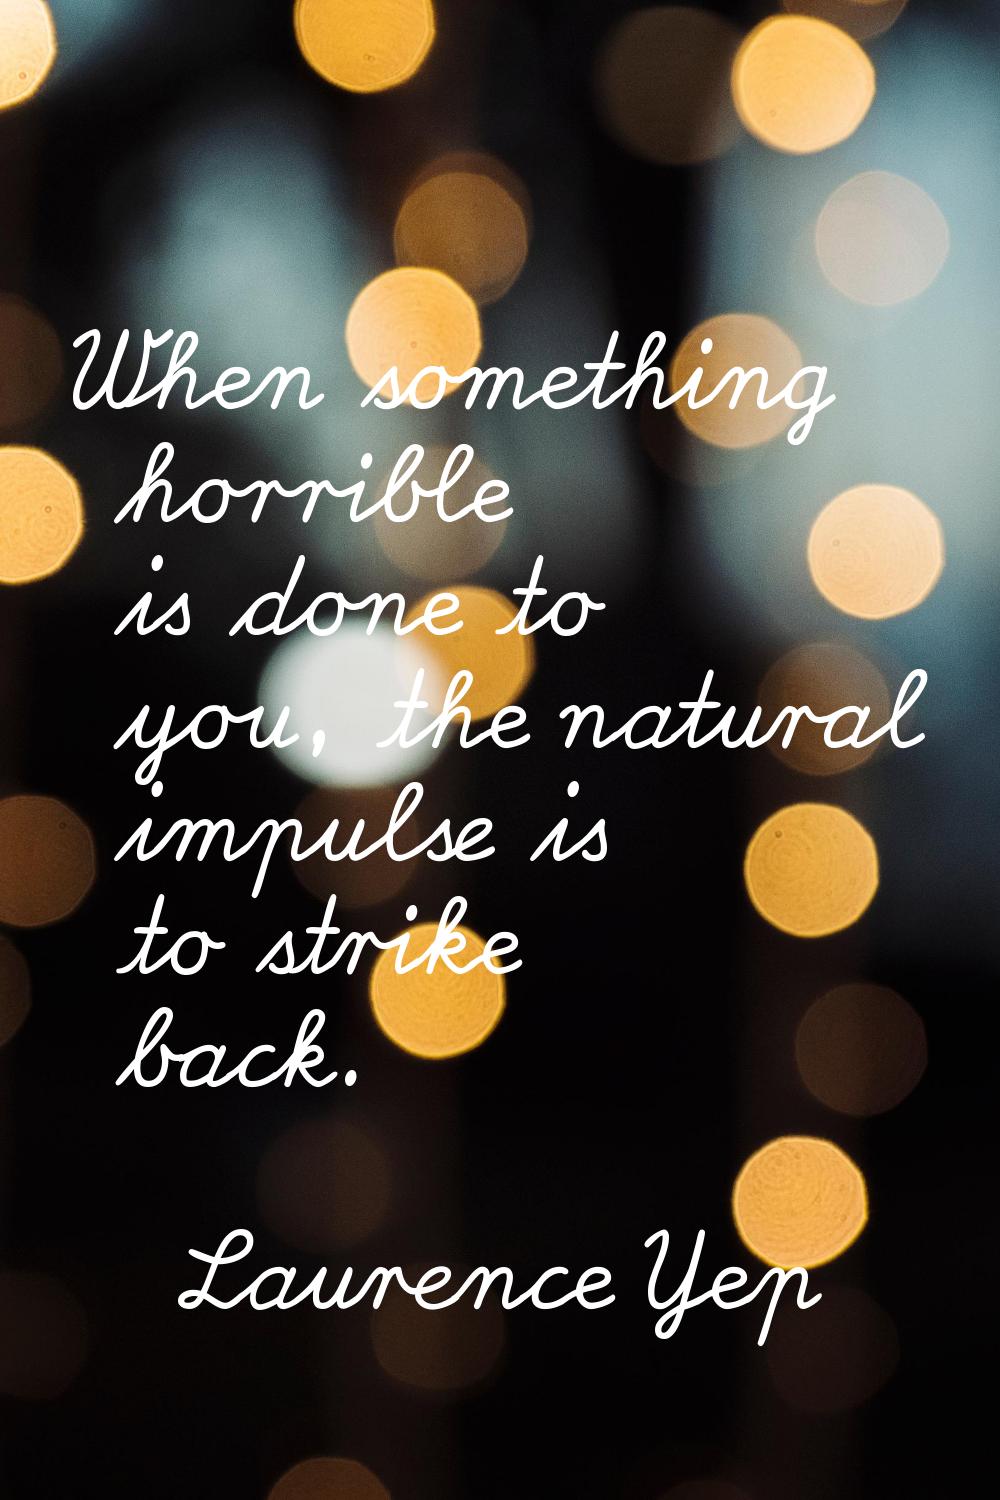 When something horrible is done to you, the natural impulse is to strike back.